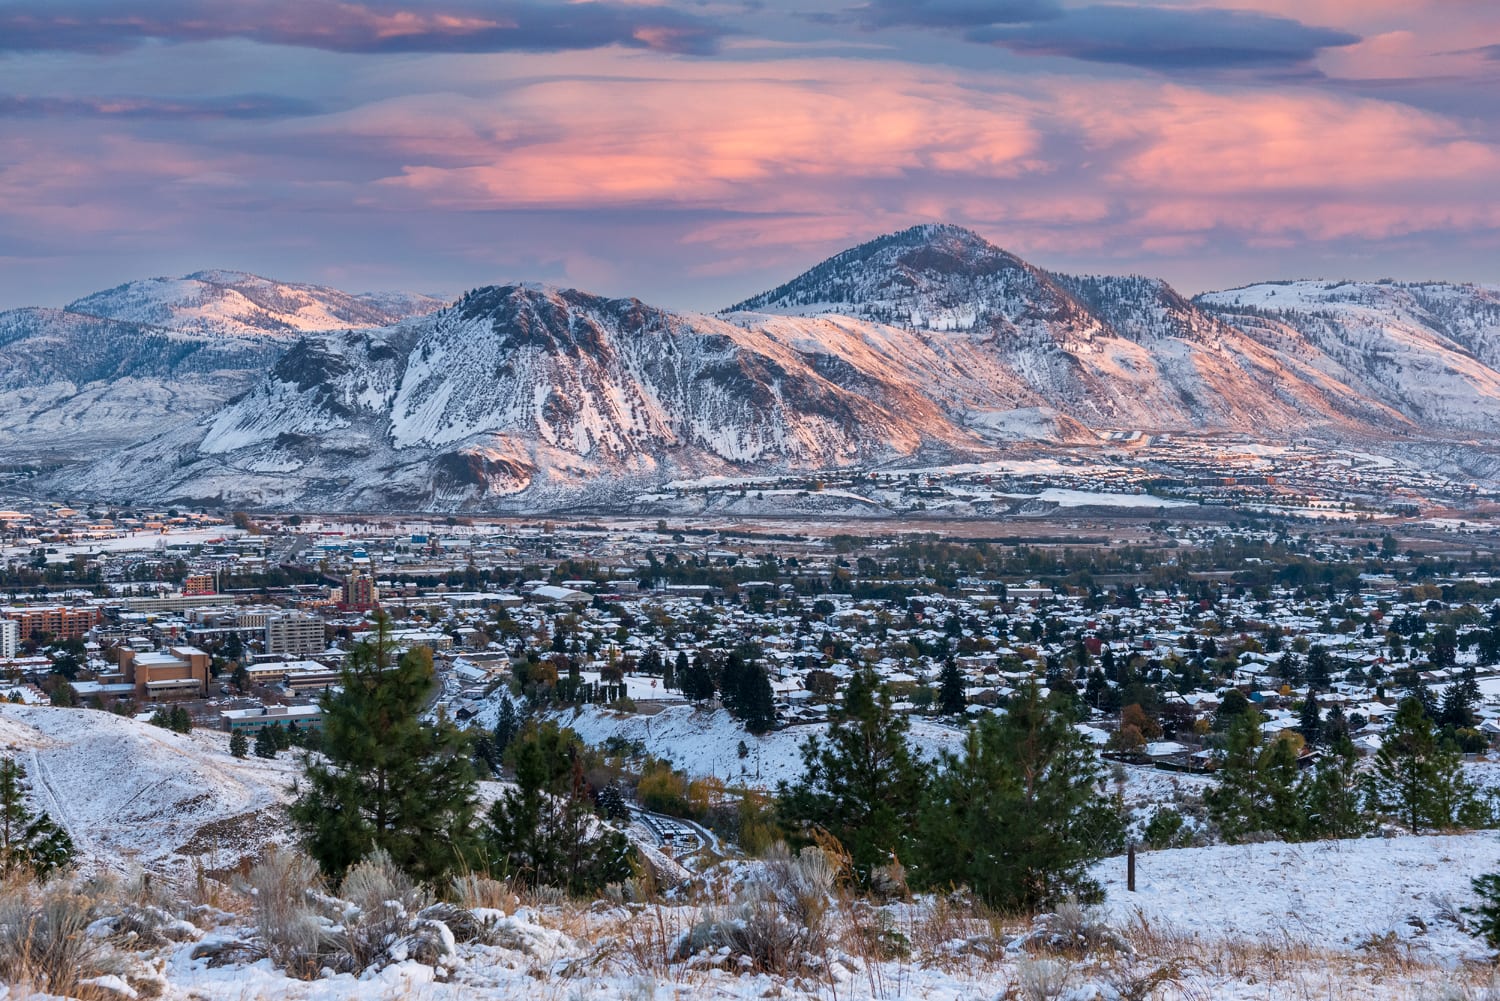 snowy mountains and city with pink and blue clouds and sky